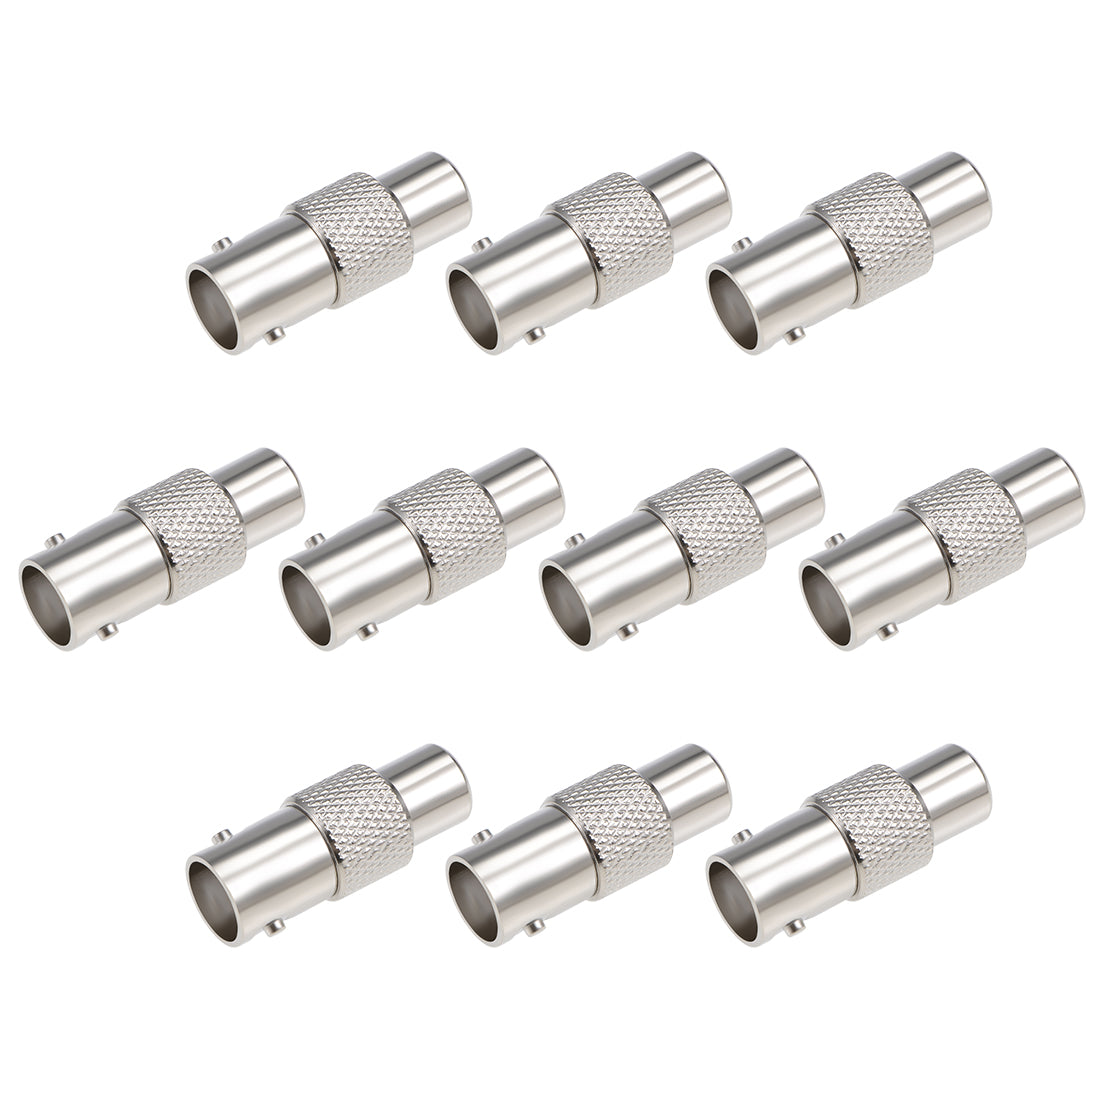 uxcell Uxcell 10PCS Alloy BNC Female to RCA Female Adapter Straight Connector for CCTV Security Camera